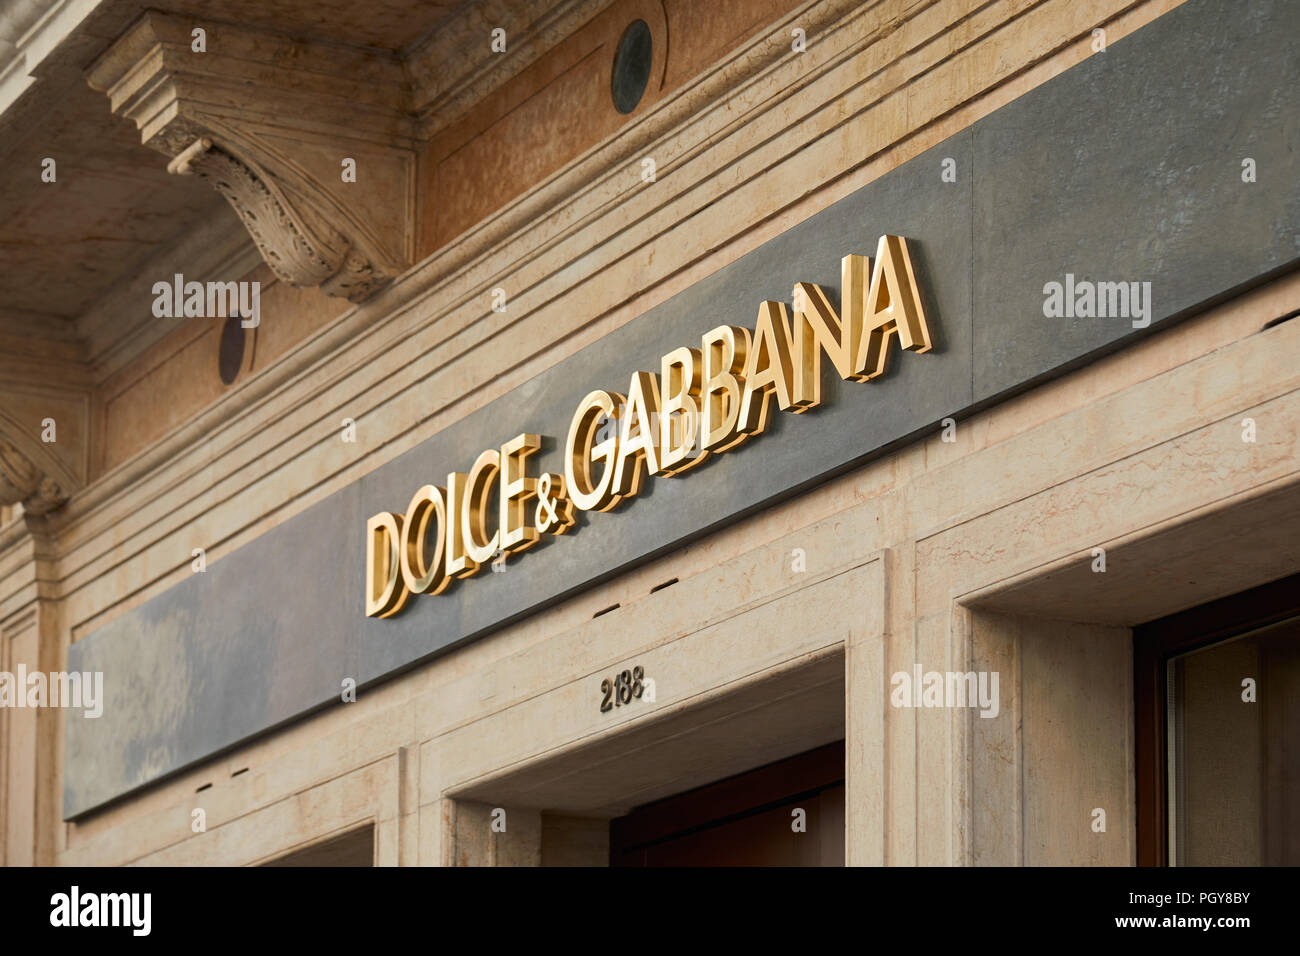 VENICE, ITALY - AUGUST 12, 2017: Dolce and Gabbana golden store sign in Venice, Italy Stock Photo